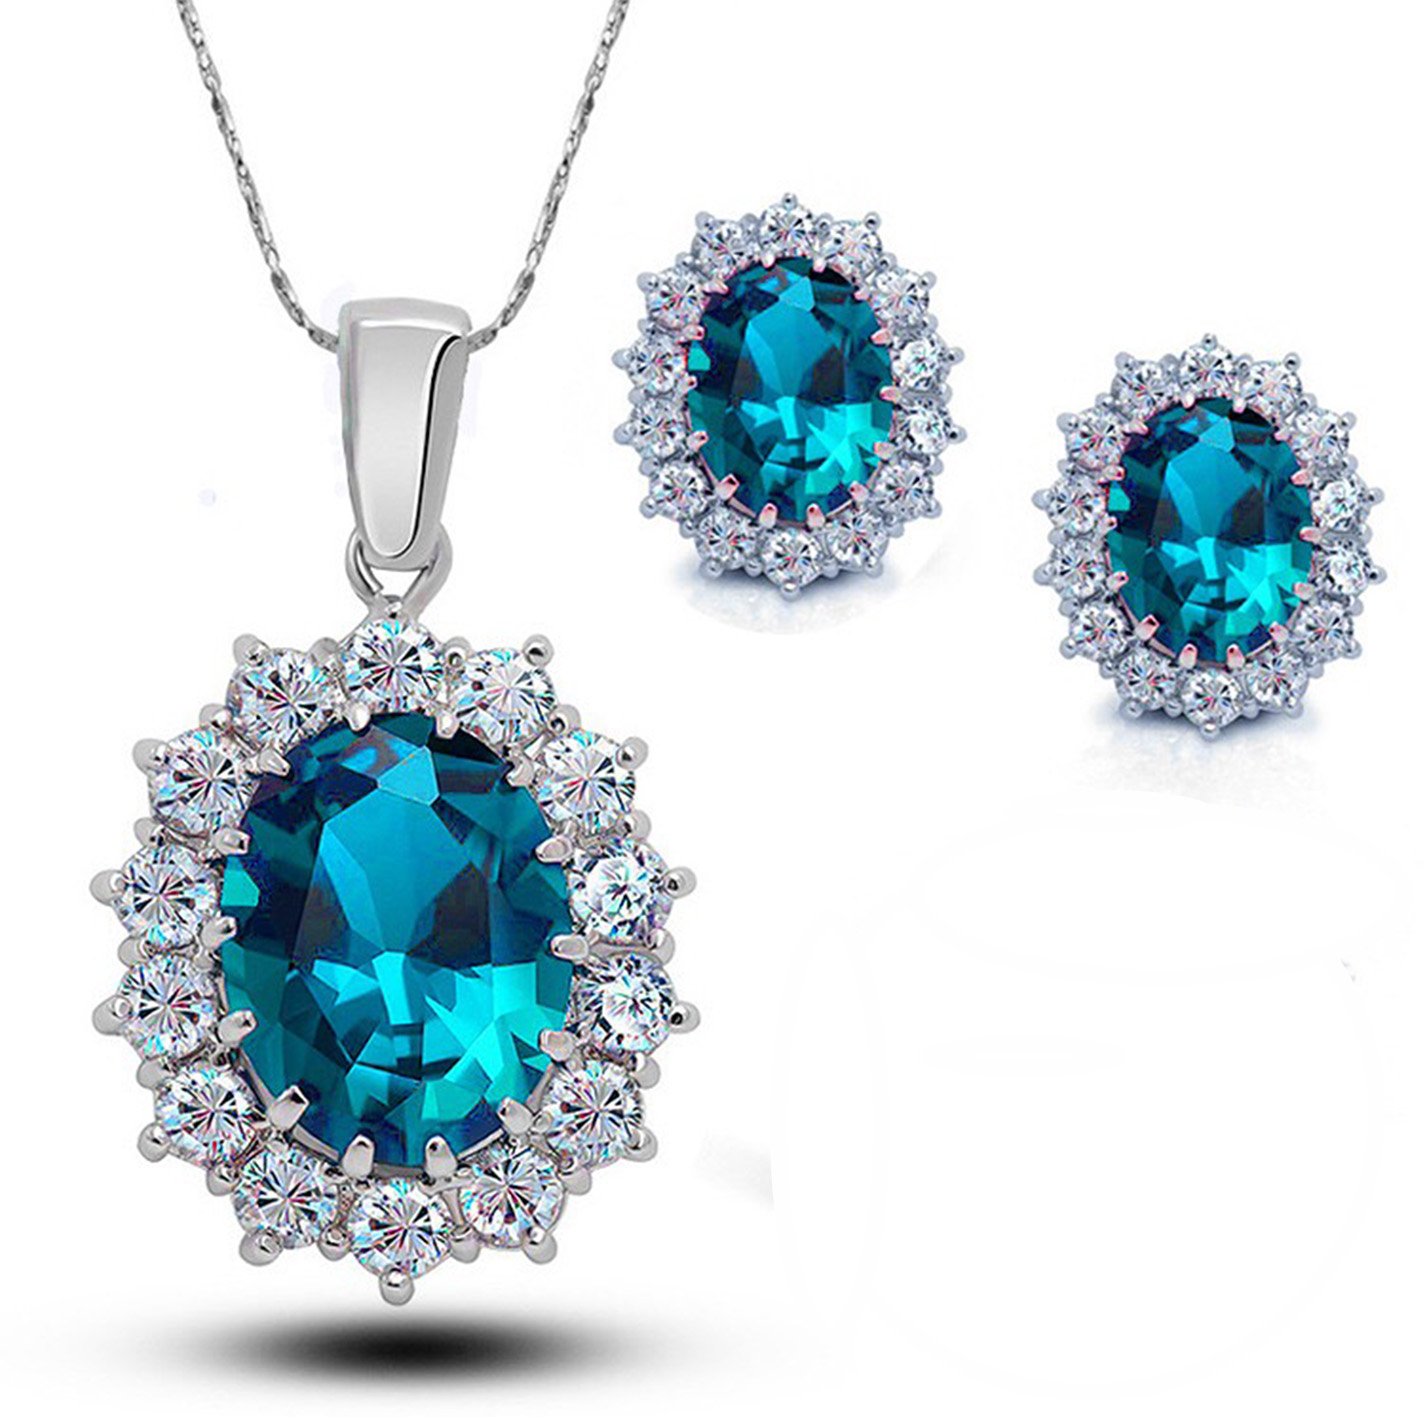 Bonjour Jewelers 4 Cttw Oval Shape Aquamarine 18 Inch Necklace And Earrings Set In 18k Gold Plated